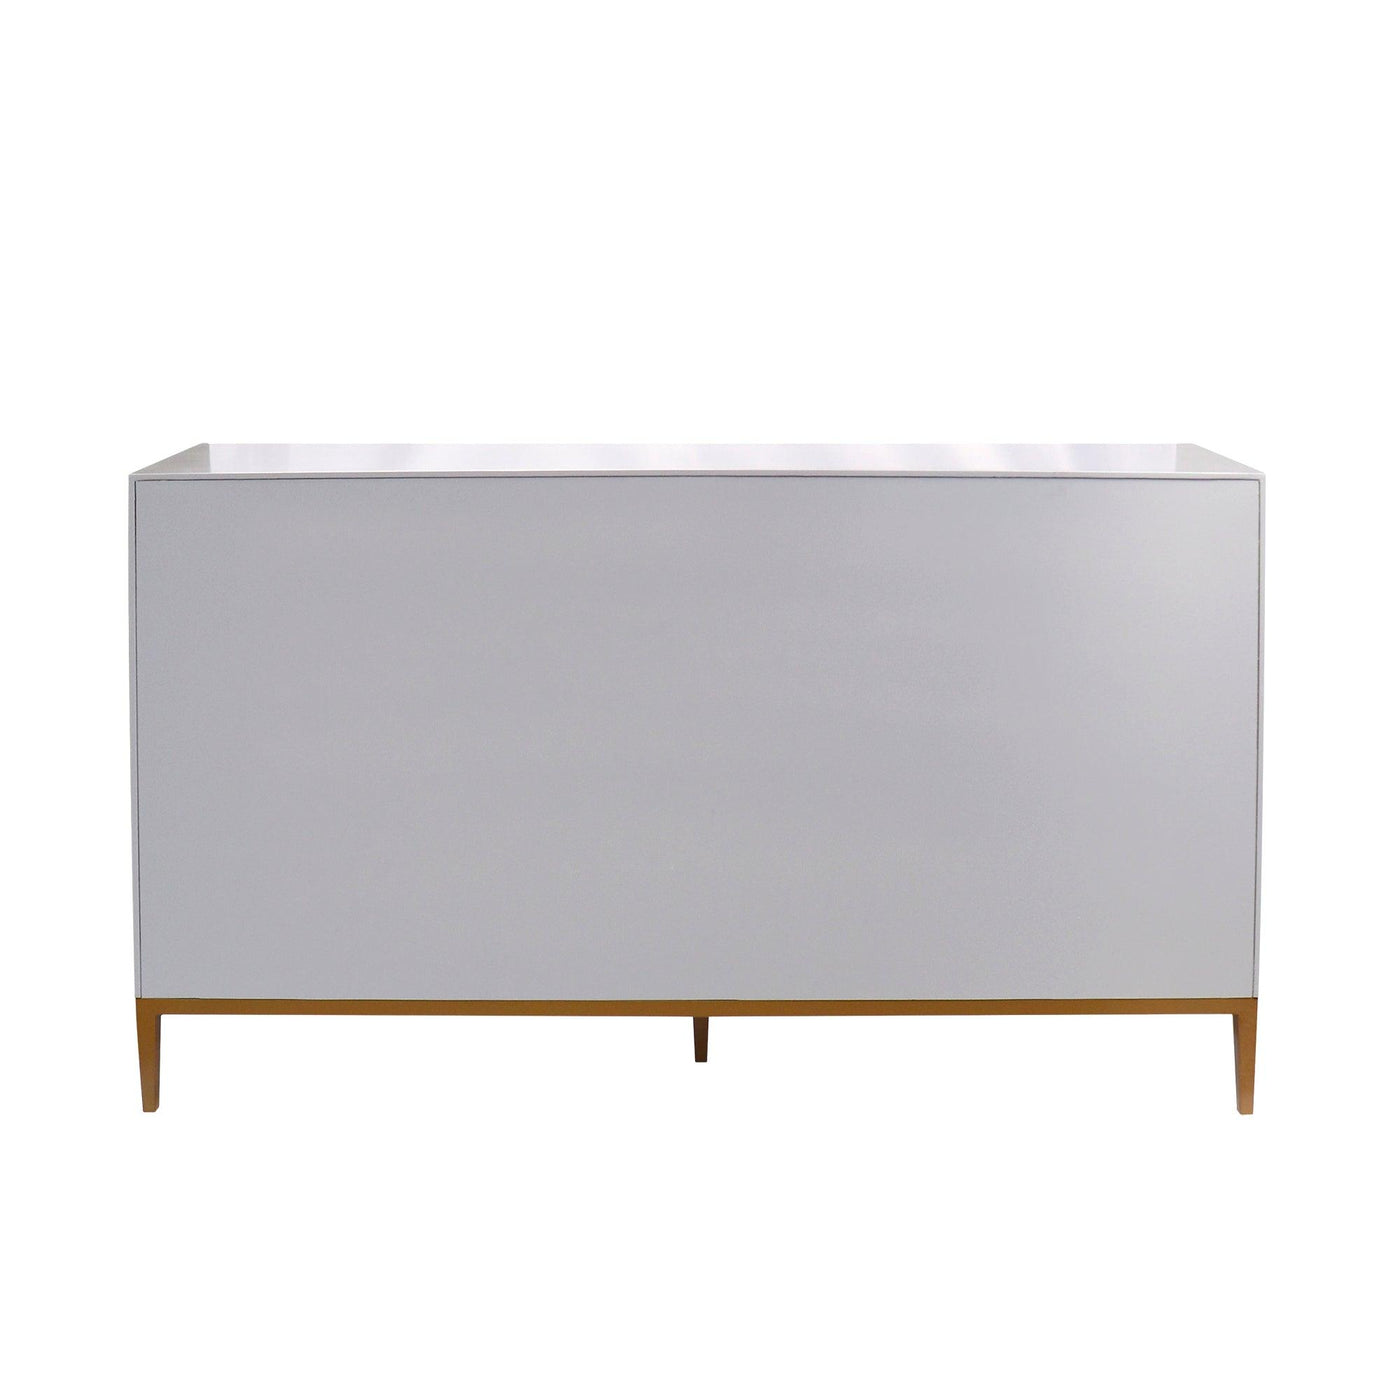 Canvello Annabelle Sideboard with 4 Floral Doors, 2 Drawers & Bronze Metal Frame